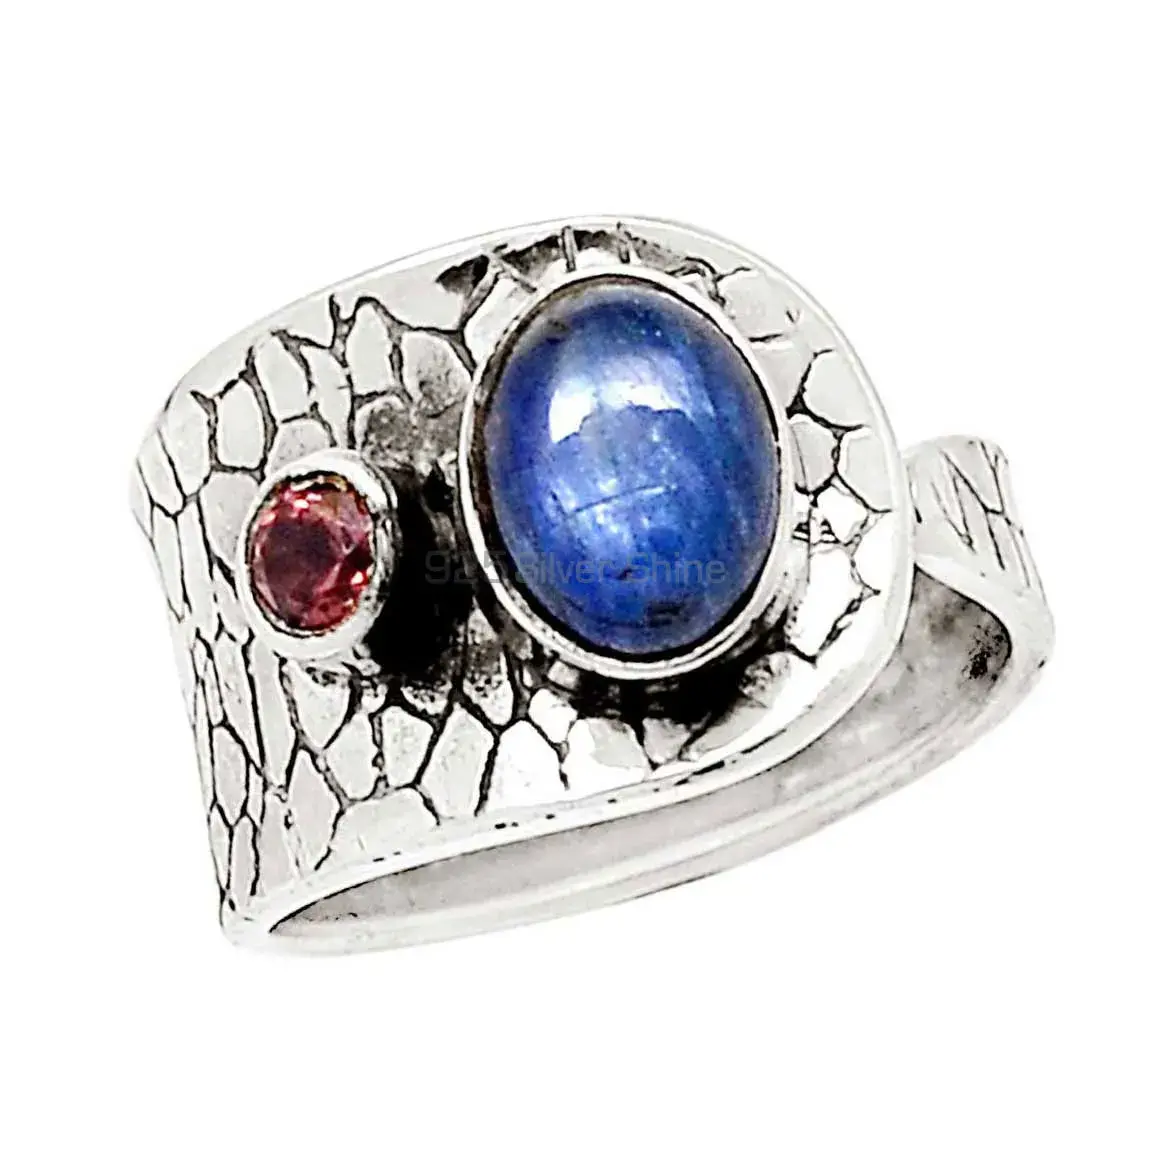 Antique Look Silver Snake Rings In Natural Stone 925SR2245